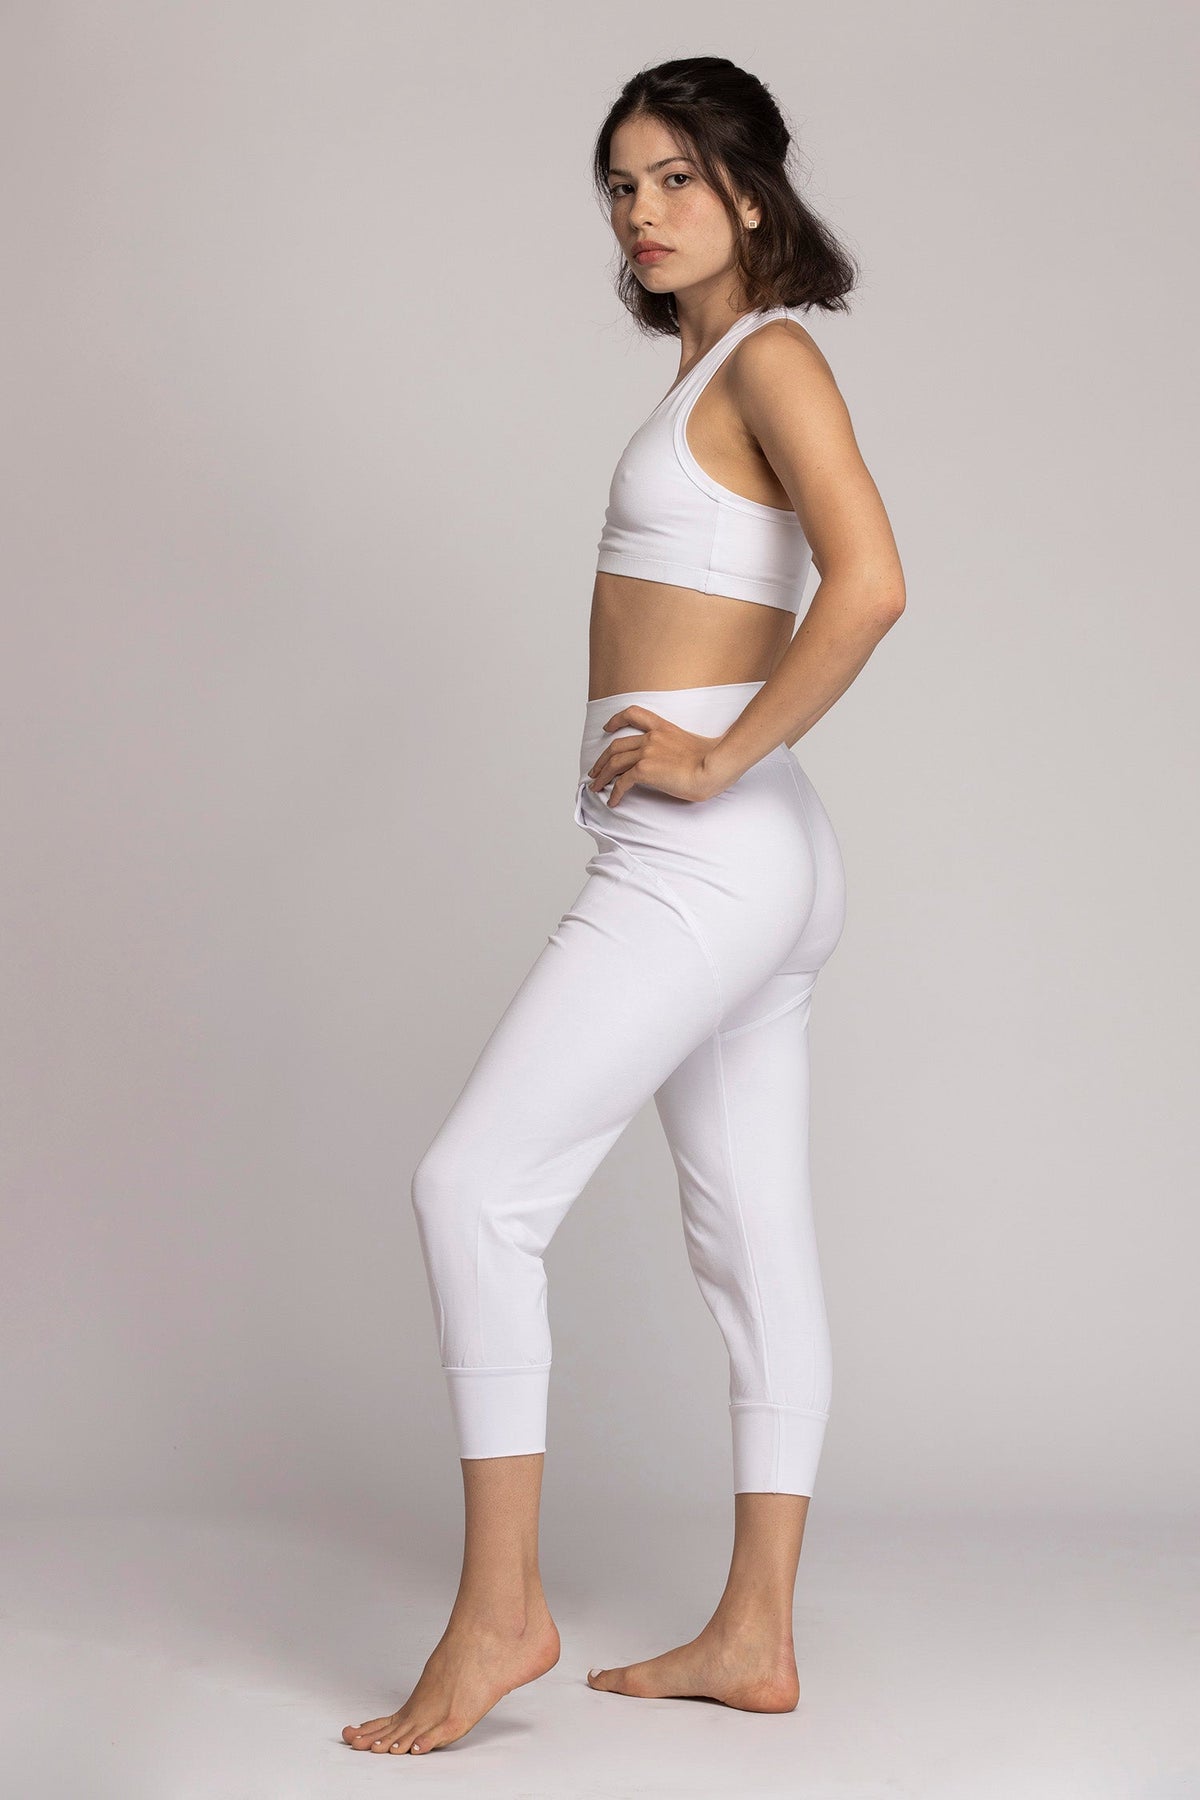 50%off I’mPerfect Organic Cotton Slouchy Capri Pants was 25%off